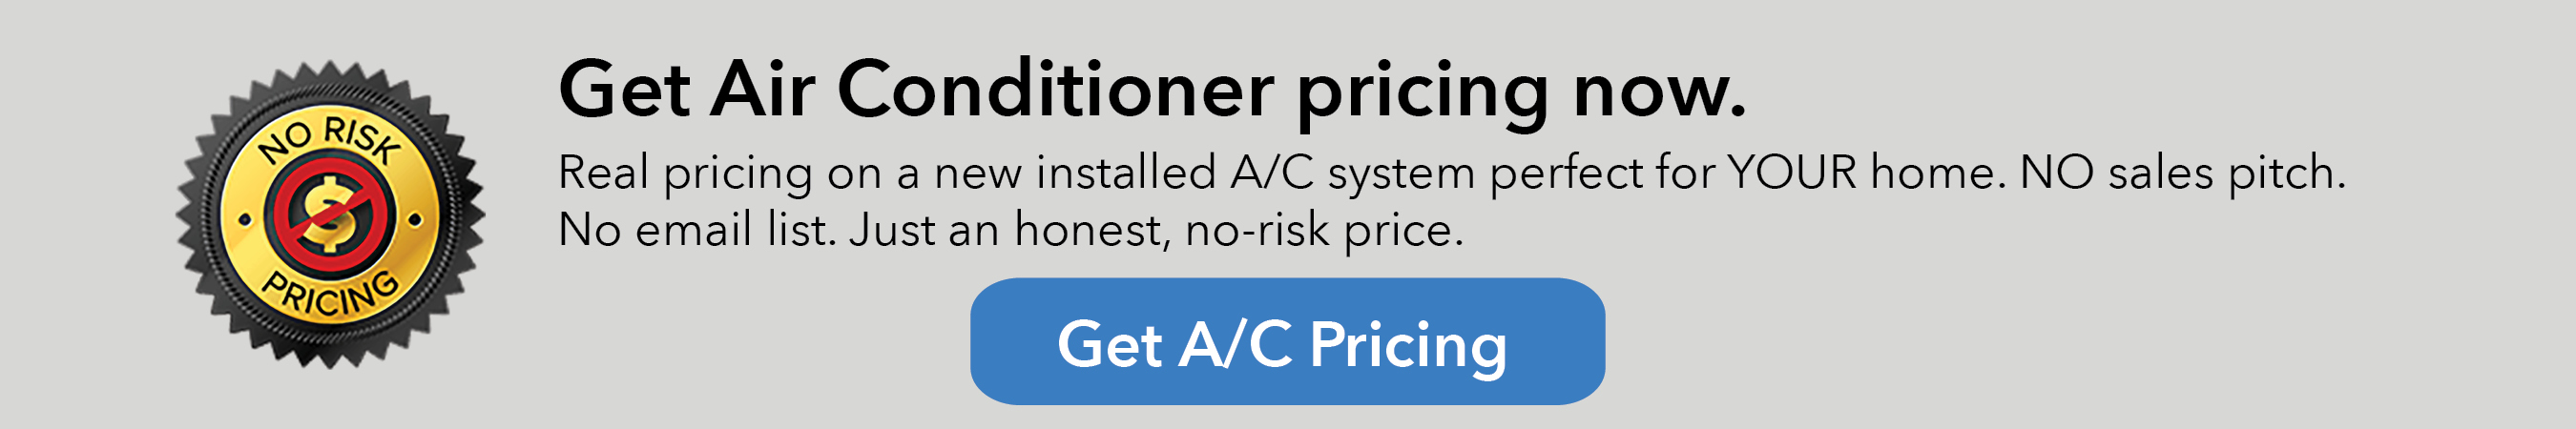 Air Conditioning Pricing Banner